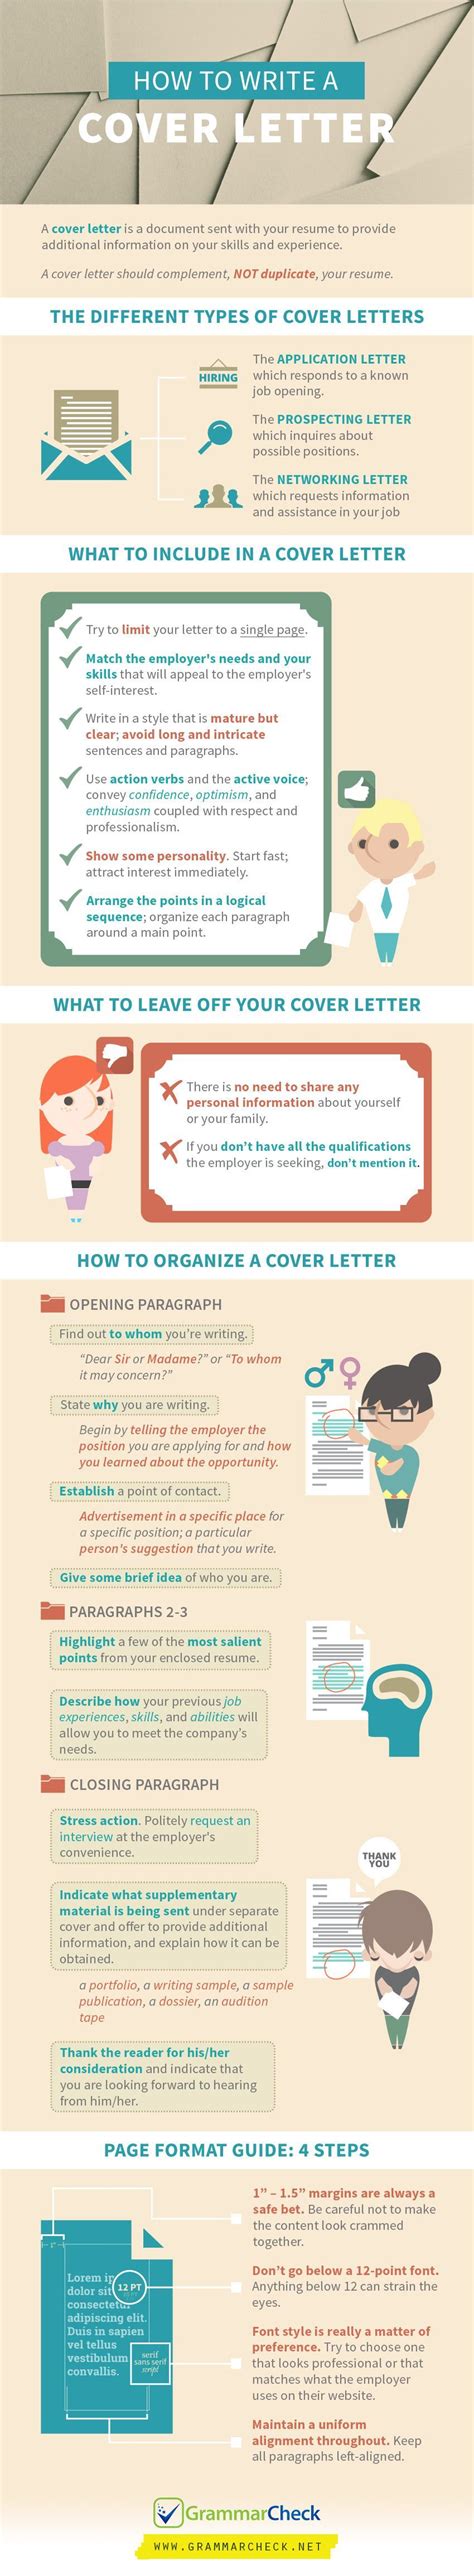 Examiners write cover letters to support their resume. No title (With images) | Job cover letter, Writing a cover ...